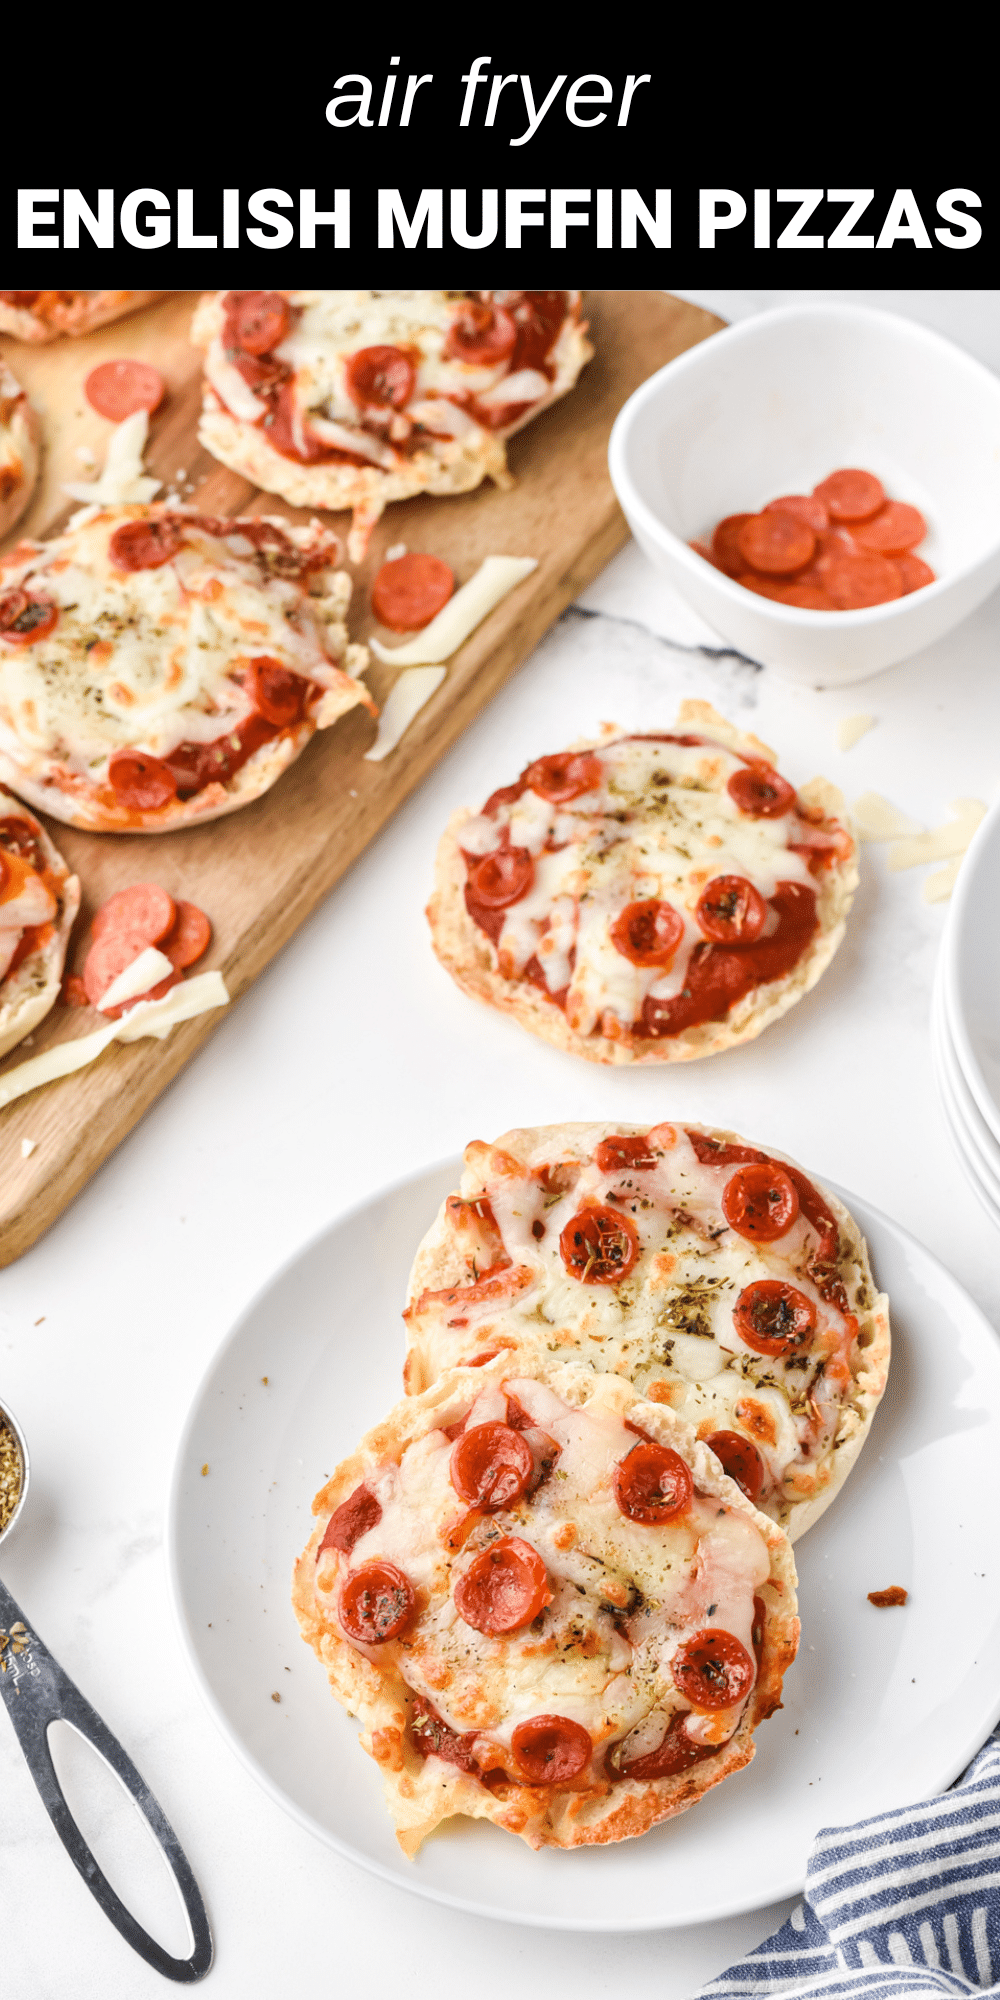 These air fryer English muffin pizzas are a delicious homemade mini version of the family dinner favorite that’s ready in minutes. English muffins serve as a light and toasty pizza crust, which is topped with a tangy sauce, gooey mozzarella cheese, and salty pepperoni then baked to a perfect golden brown in the air fryer.